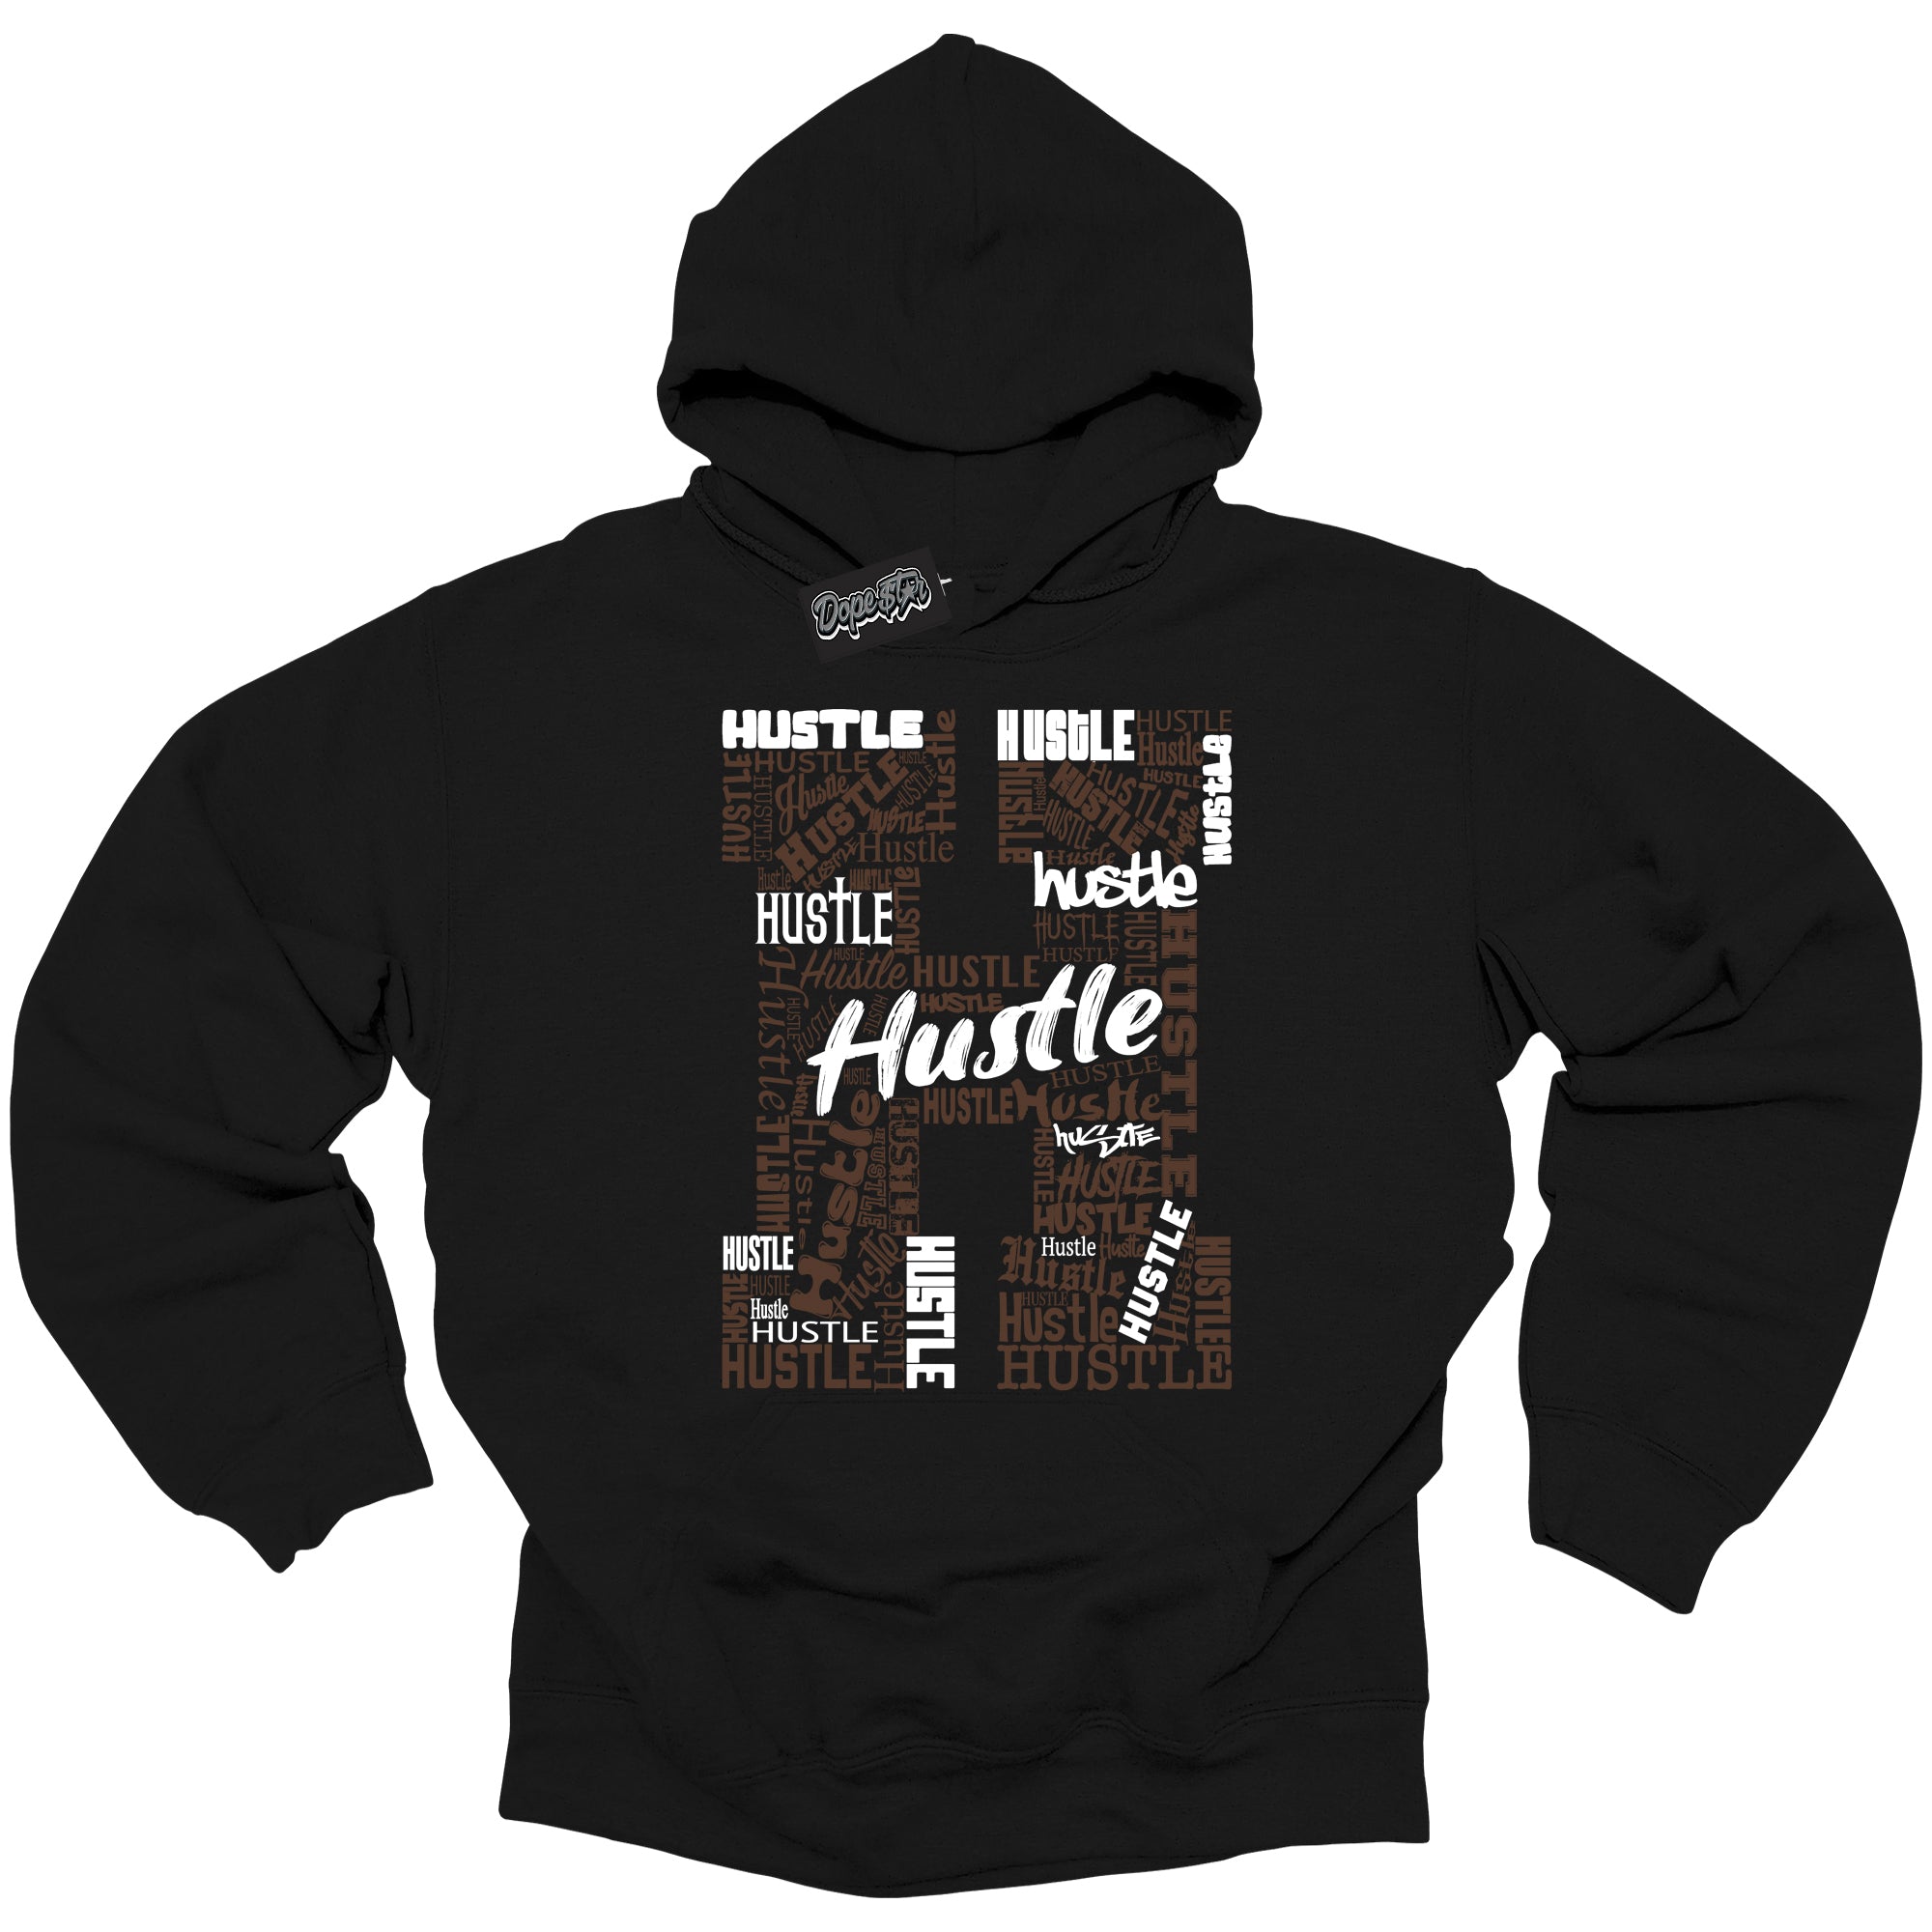 Cool Black Graphic DopeStar Hoodie with “ Hustle H “ print, that perfectly matches Palomino 1s sneakers